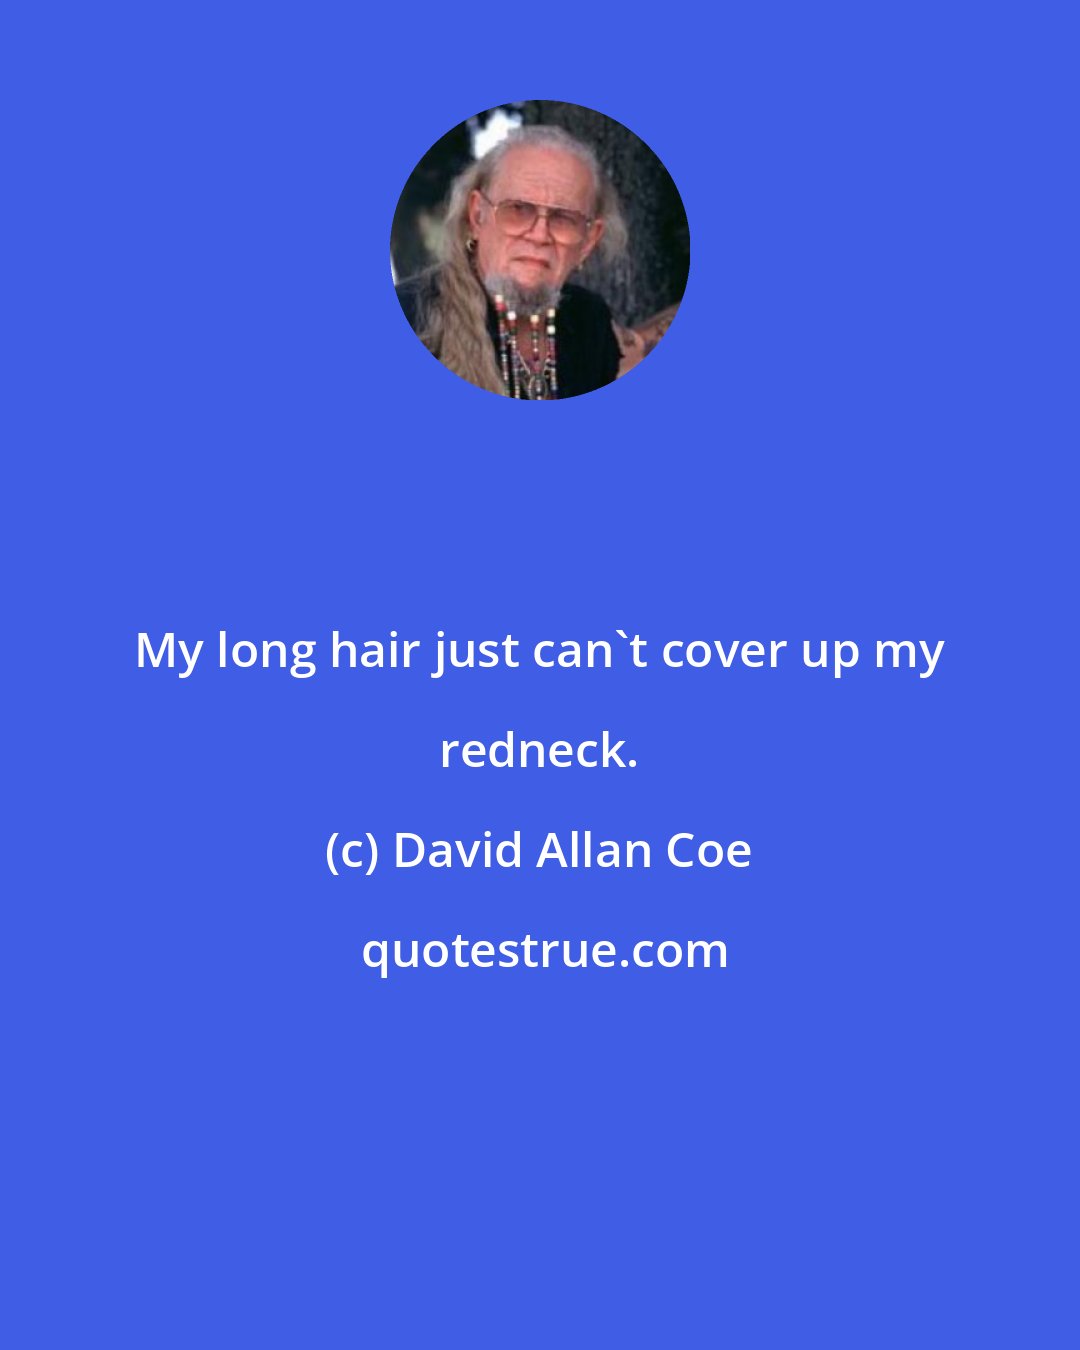 David Allan Coe: My long hair just can't cover up my redneck.